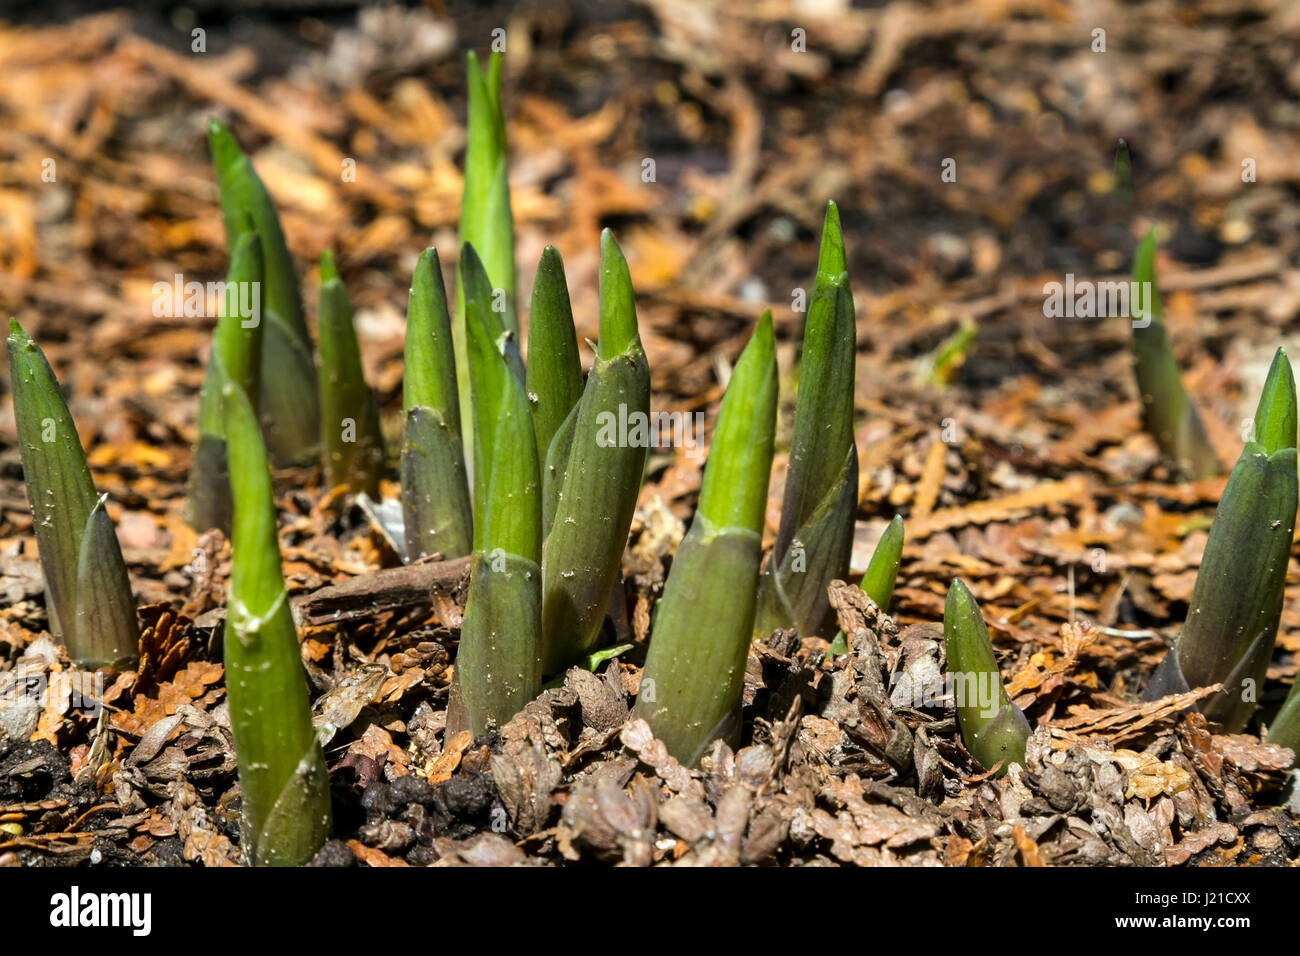 A Hostas plant pushing up through the ground in spring. Stock Photo